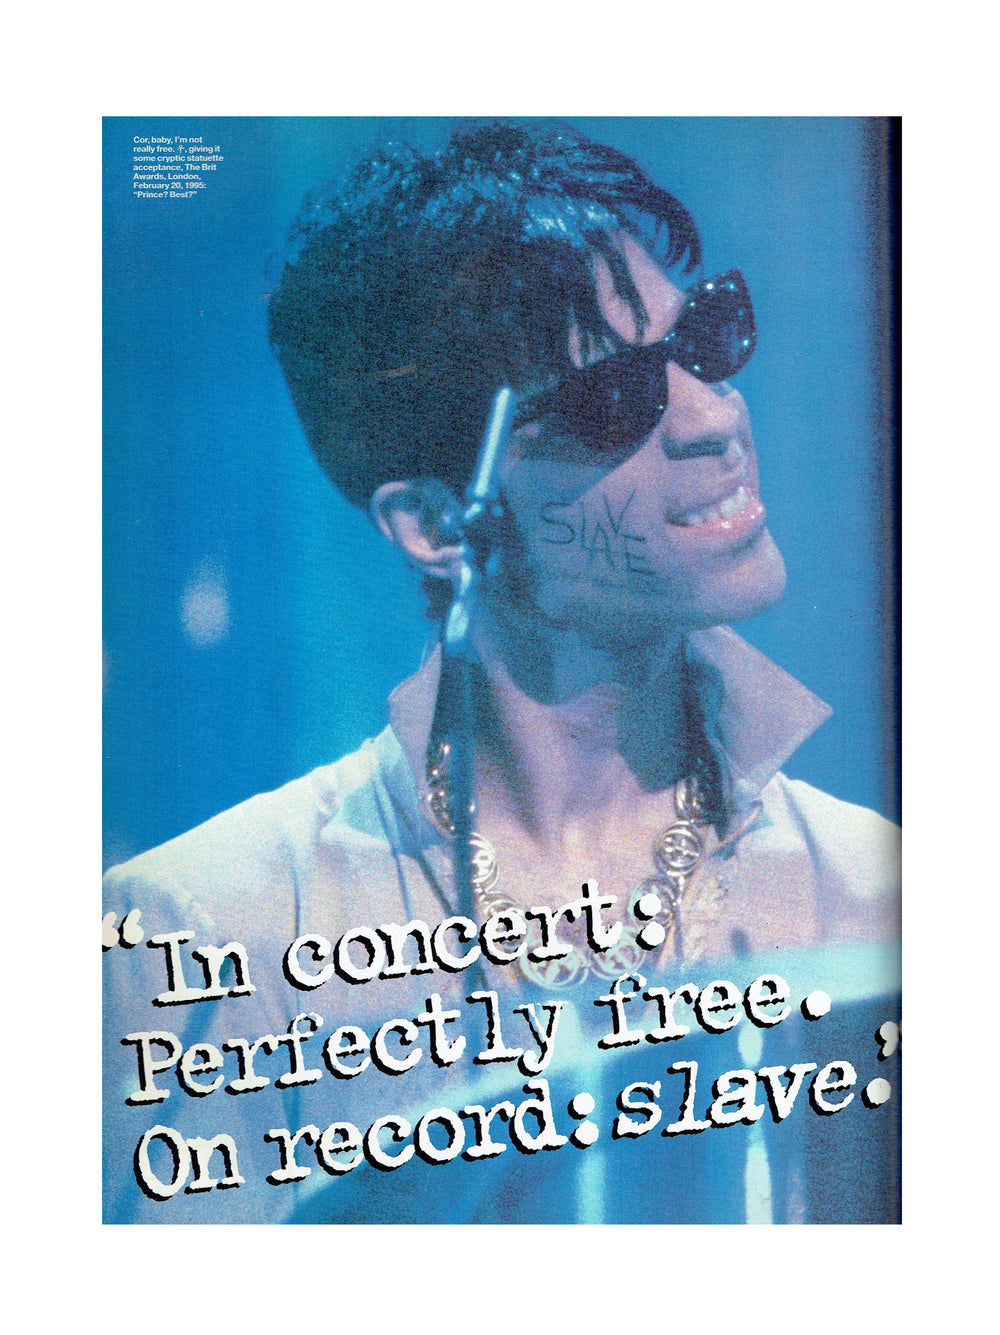 Prince Q Complete Magazine 104 May 1995 6 Page Article / Interview